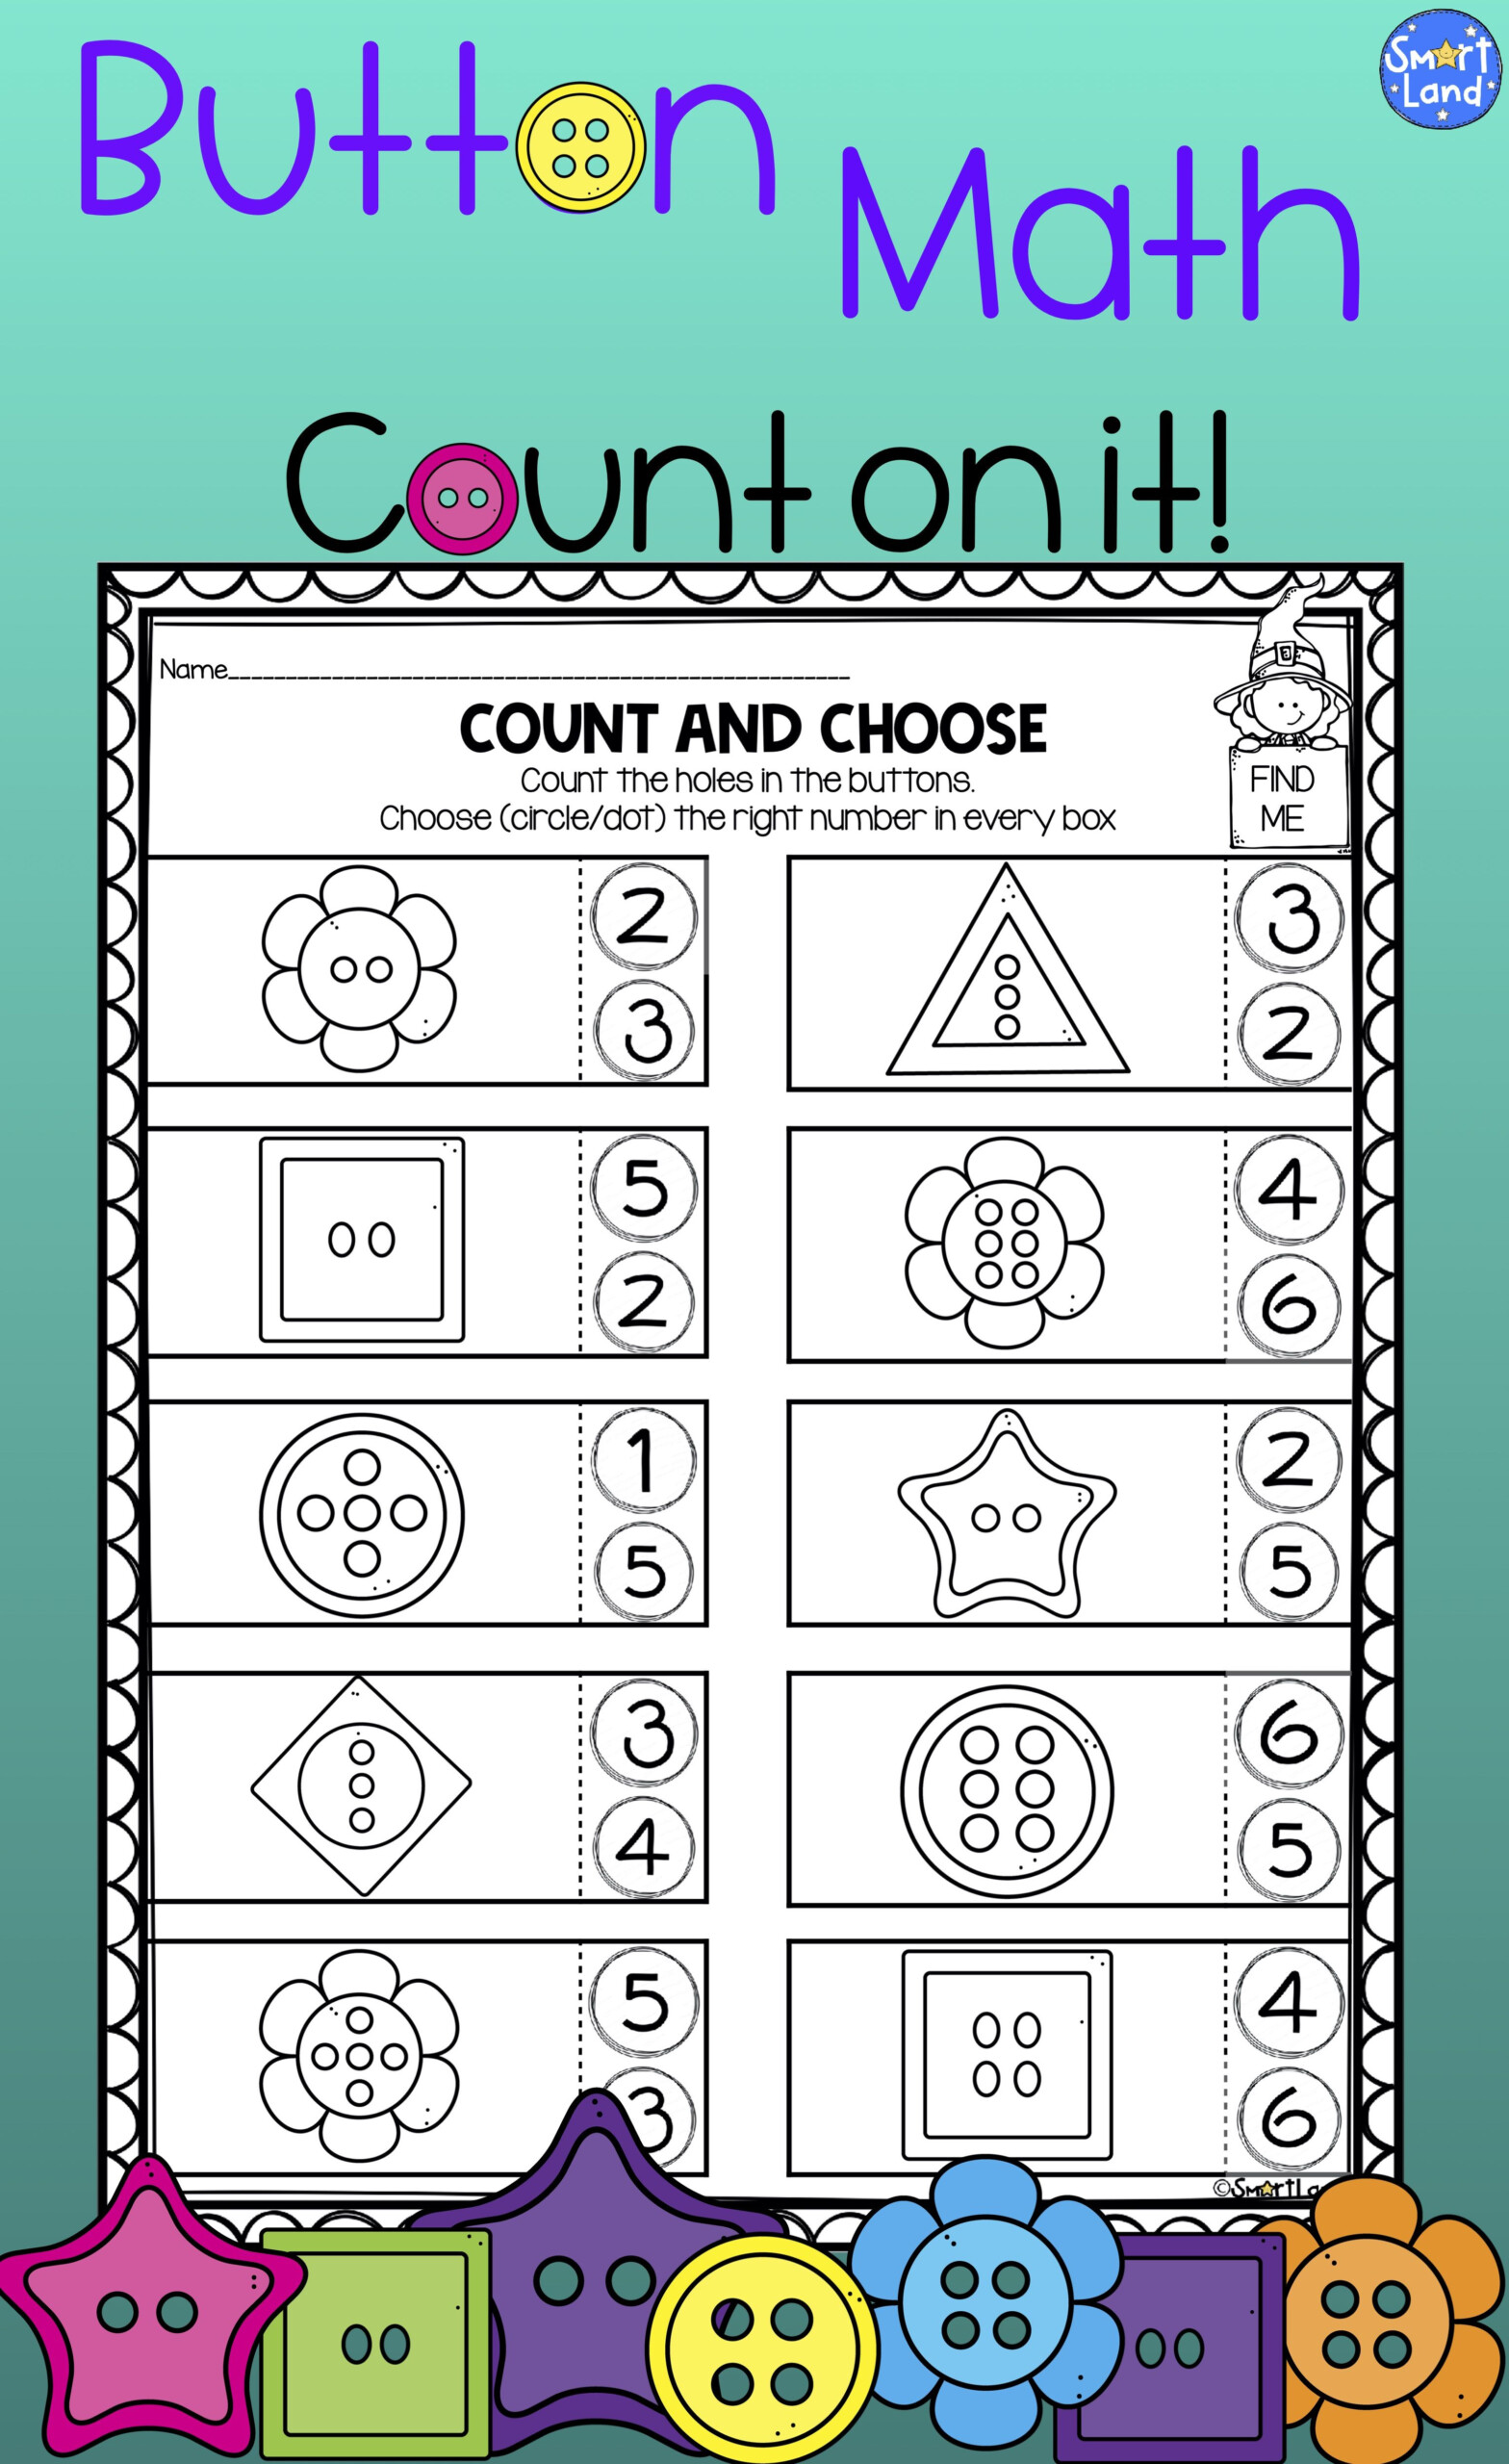 Counting Addition Early Math Practice Button Math Math Practice